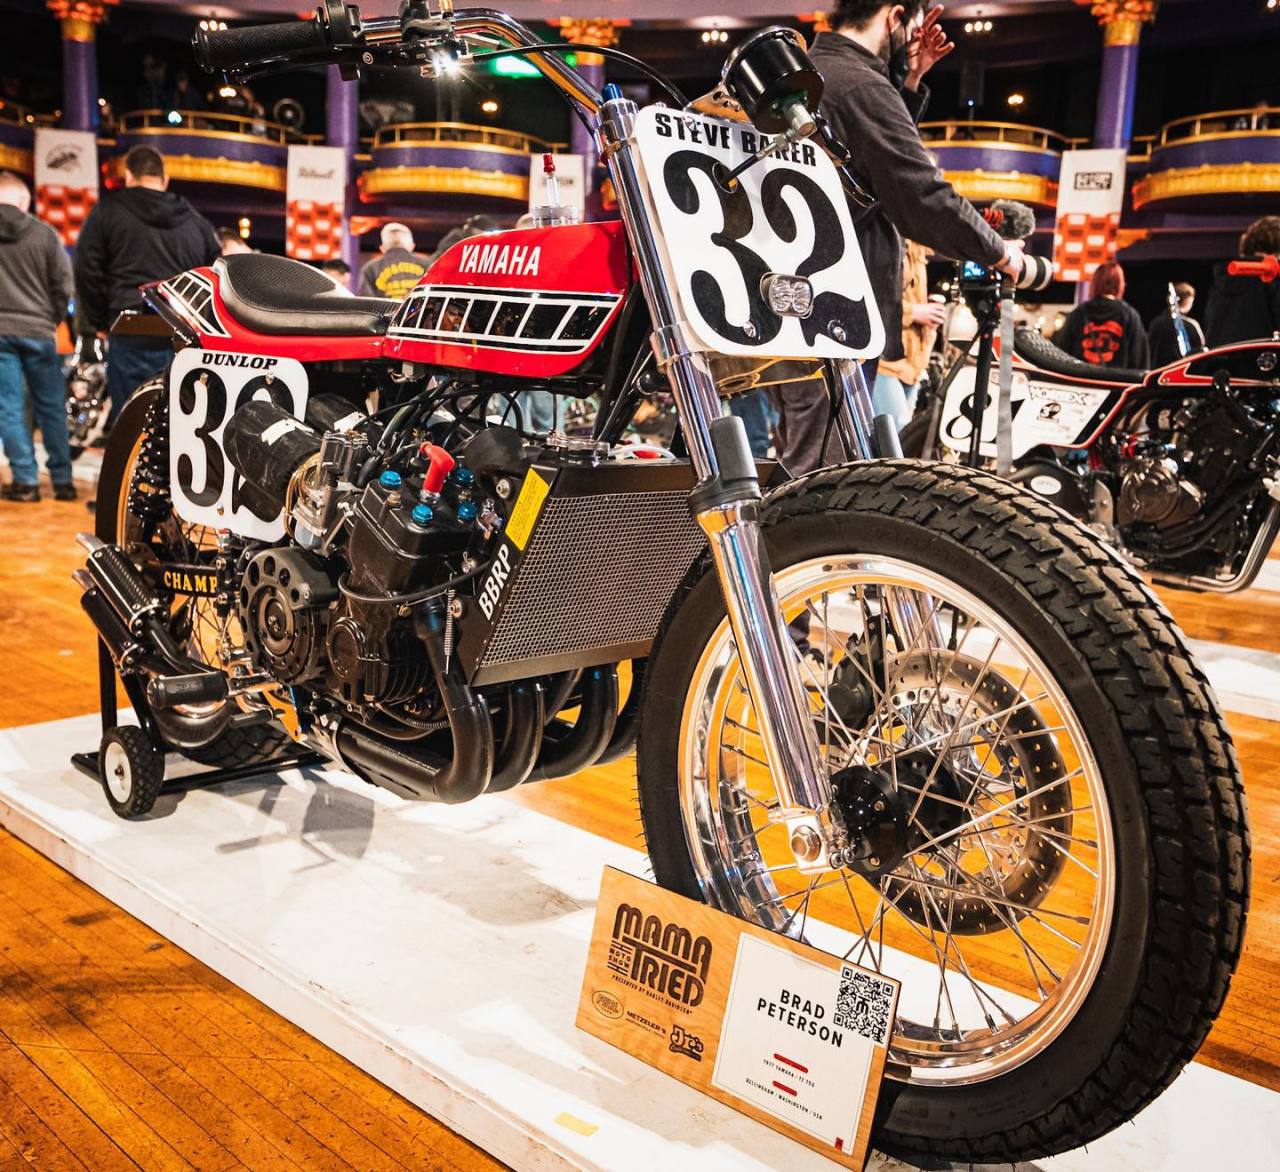 Banned But Unforgotten: Yamaha TZ750 from Brad Peterson (@soggiesnephew), as featured at @mamatriedshow 2022. A bike that, after the 1975 Indy Mile, prompted Kenny Roberts to say:
“They don’t pay me enough to ride that thing.”
After the season, the...